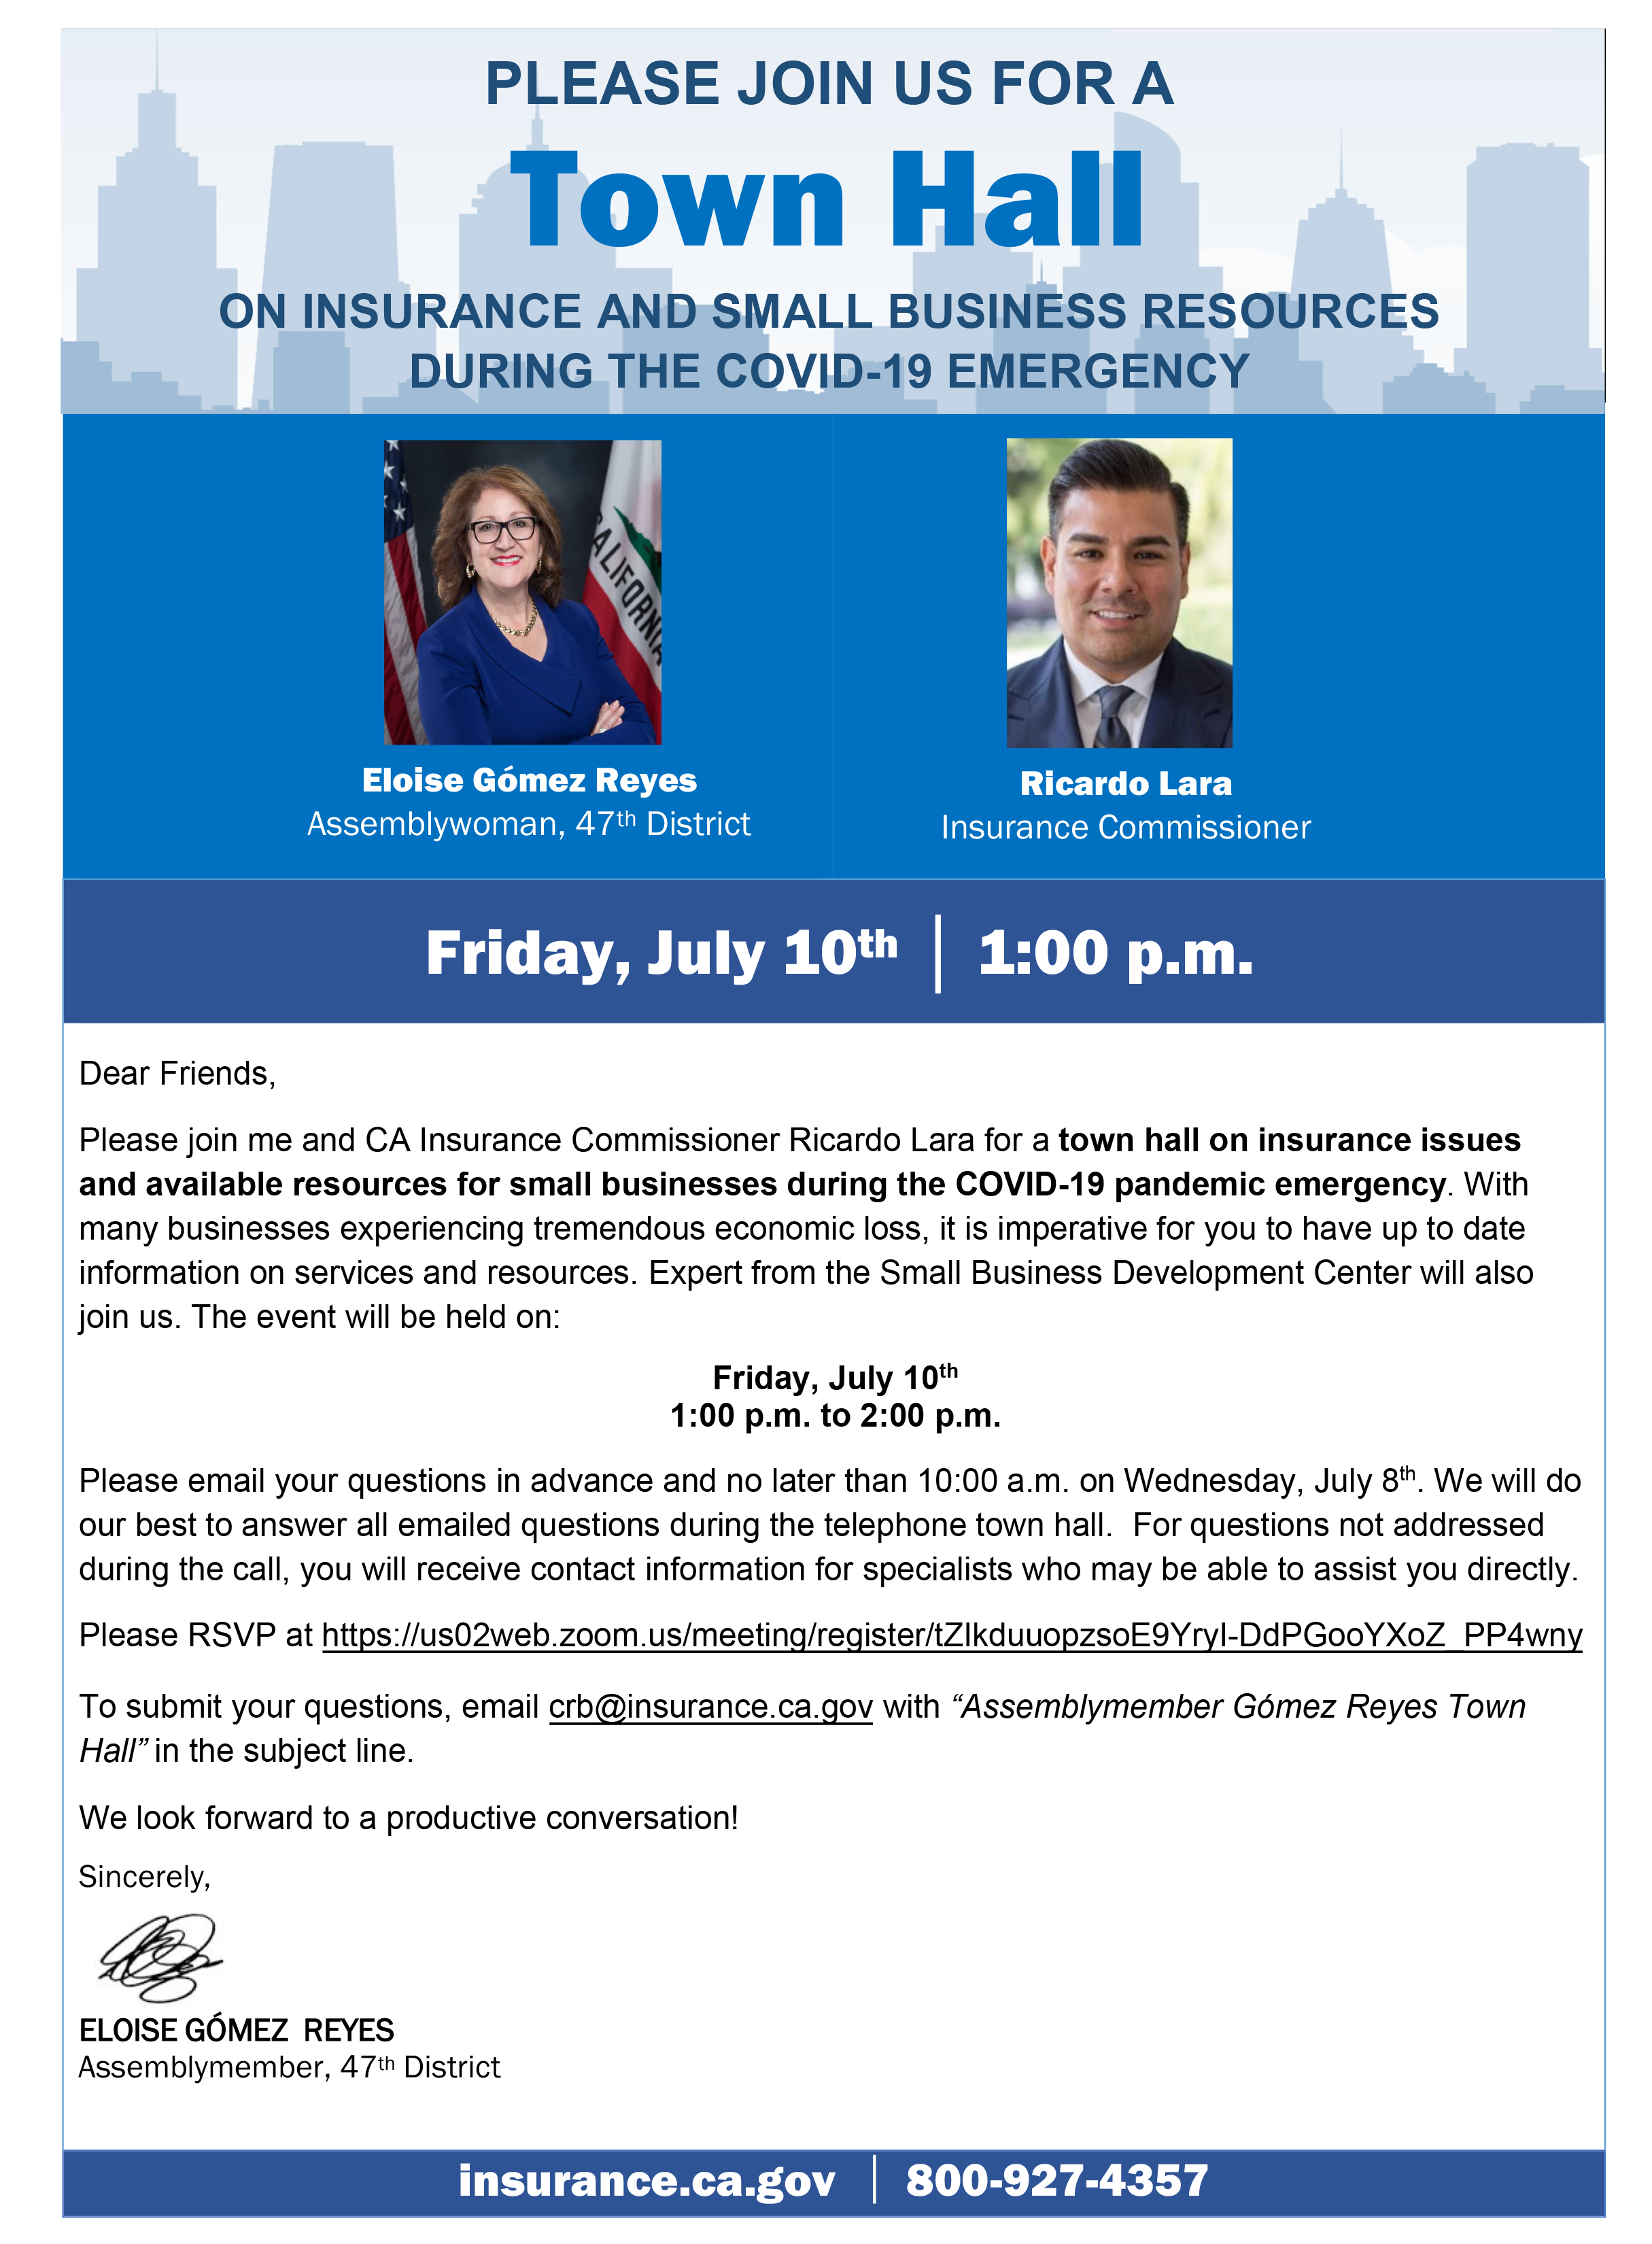 Join assemblymember Eloise Gómez Reyes and CA Insurance Commissioner Ricardo Lara for a town hall on insurance issues and available resources for small businesses. Friday July 10th 1pm.